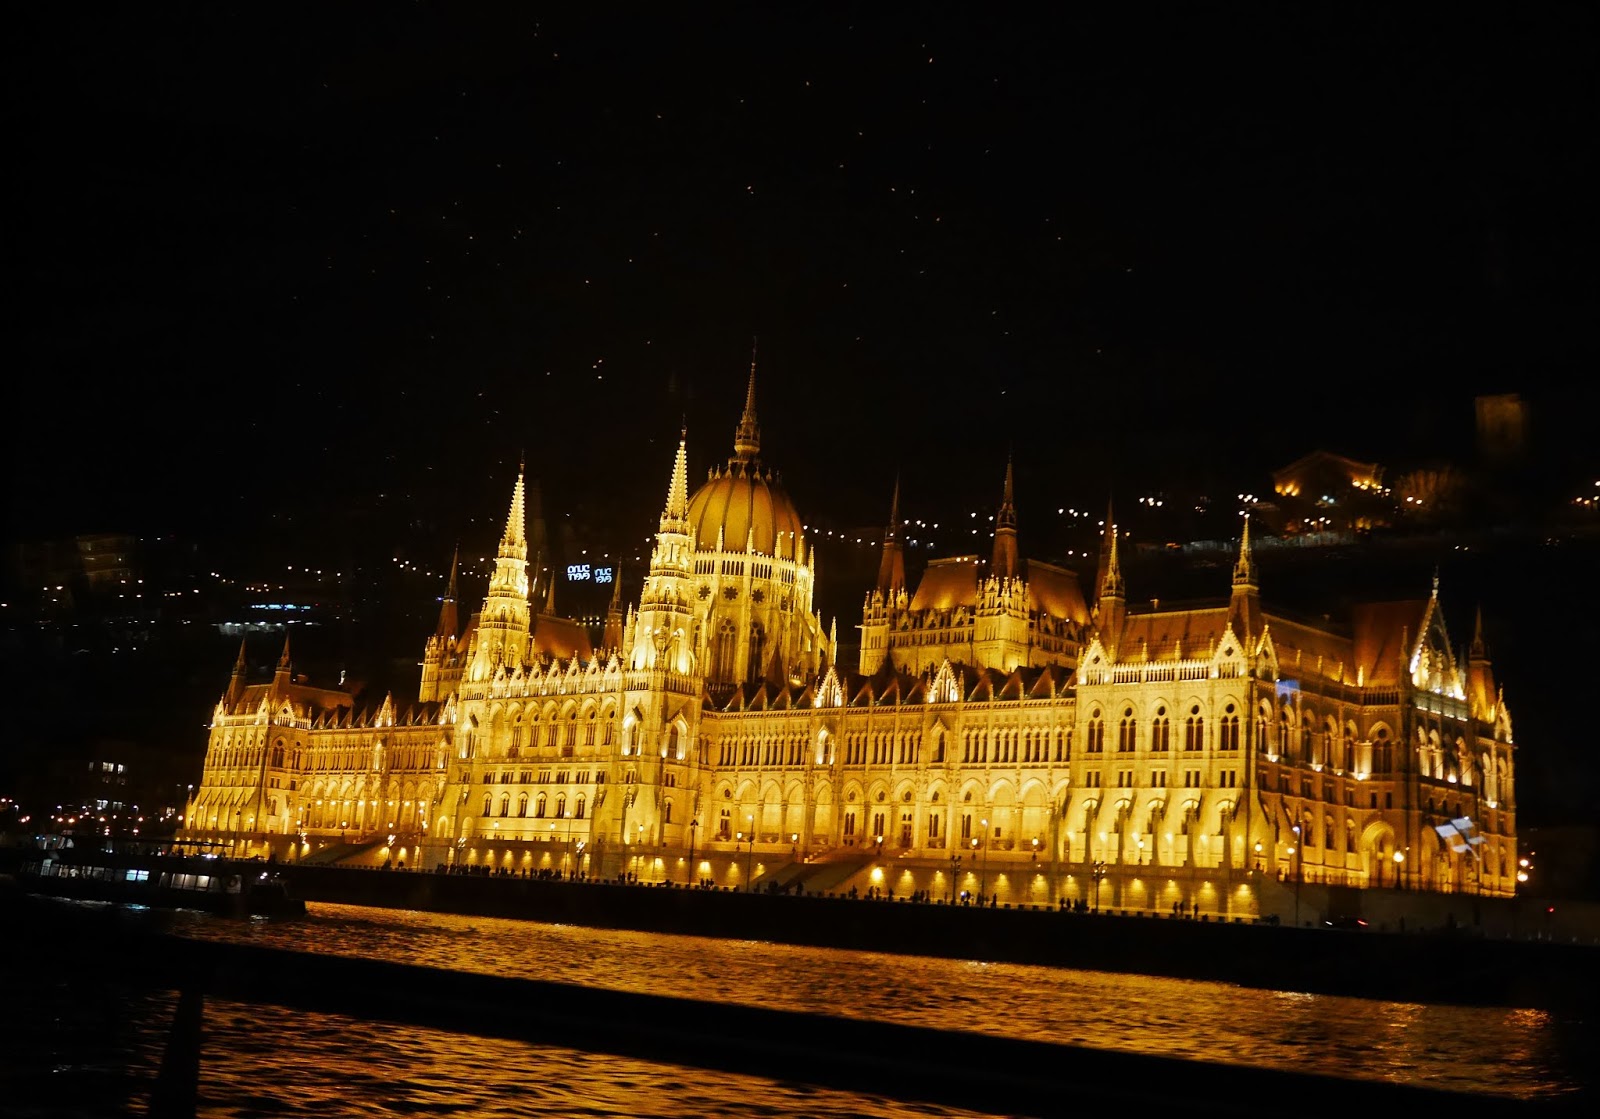 Nighttime view of the Parliament Building from our boat on the Danube, Budapest